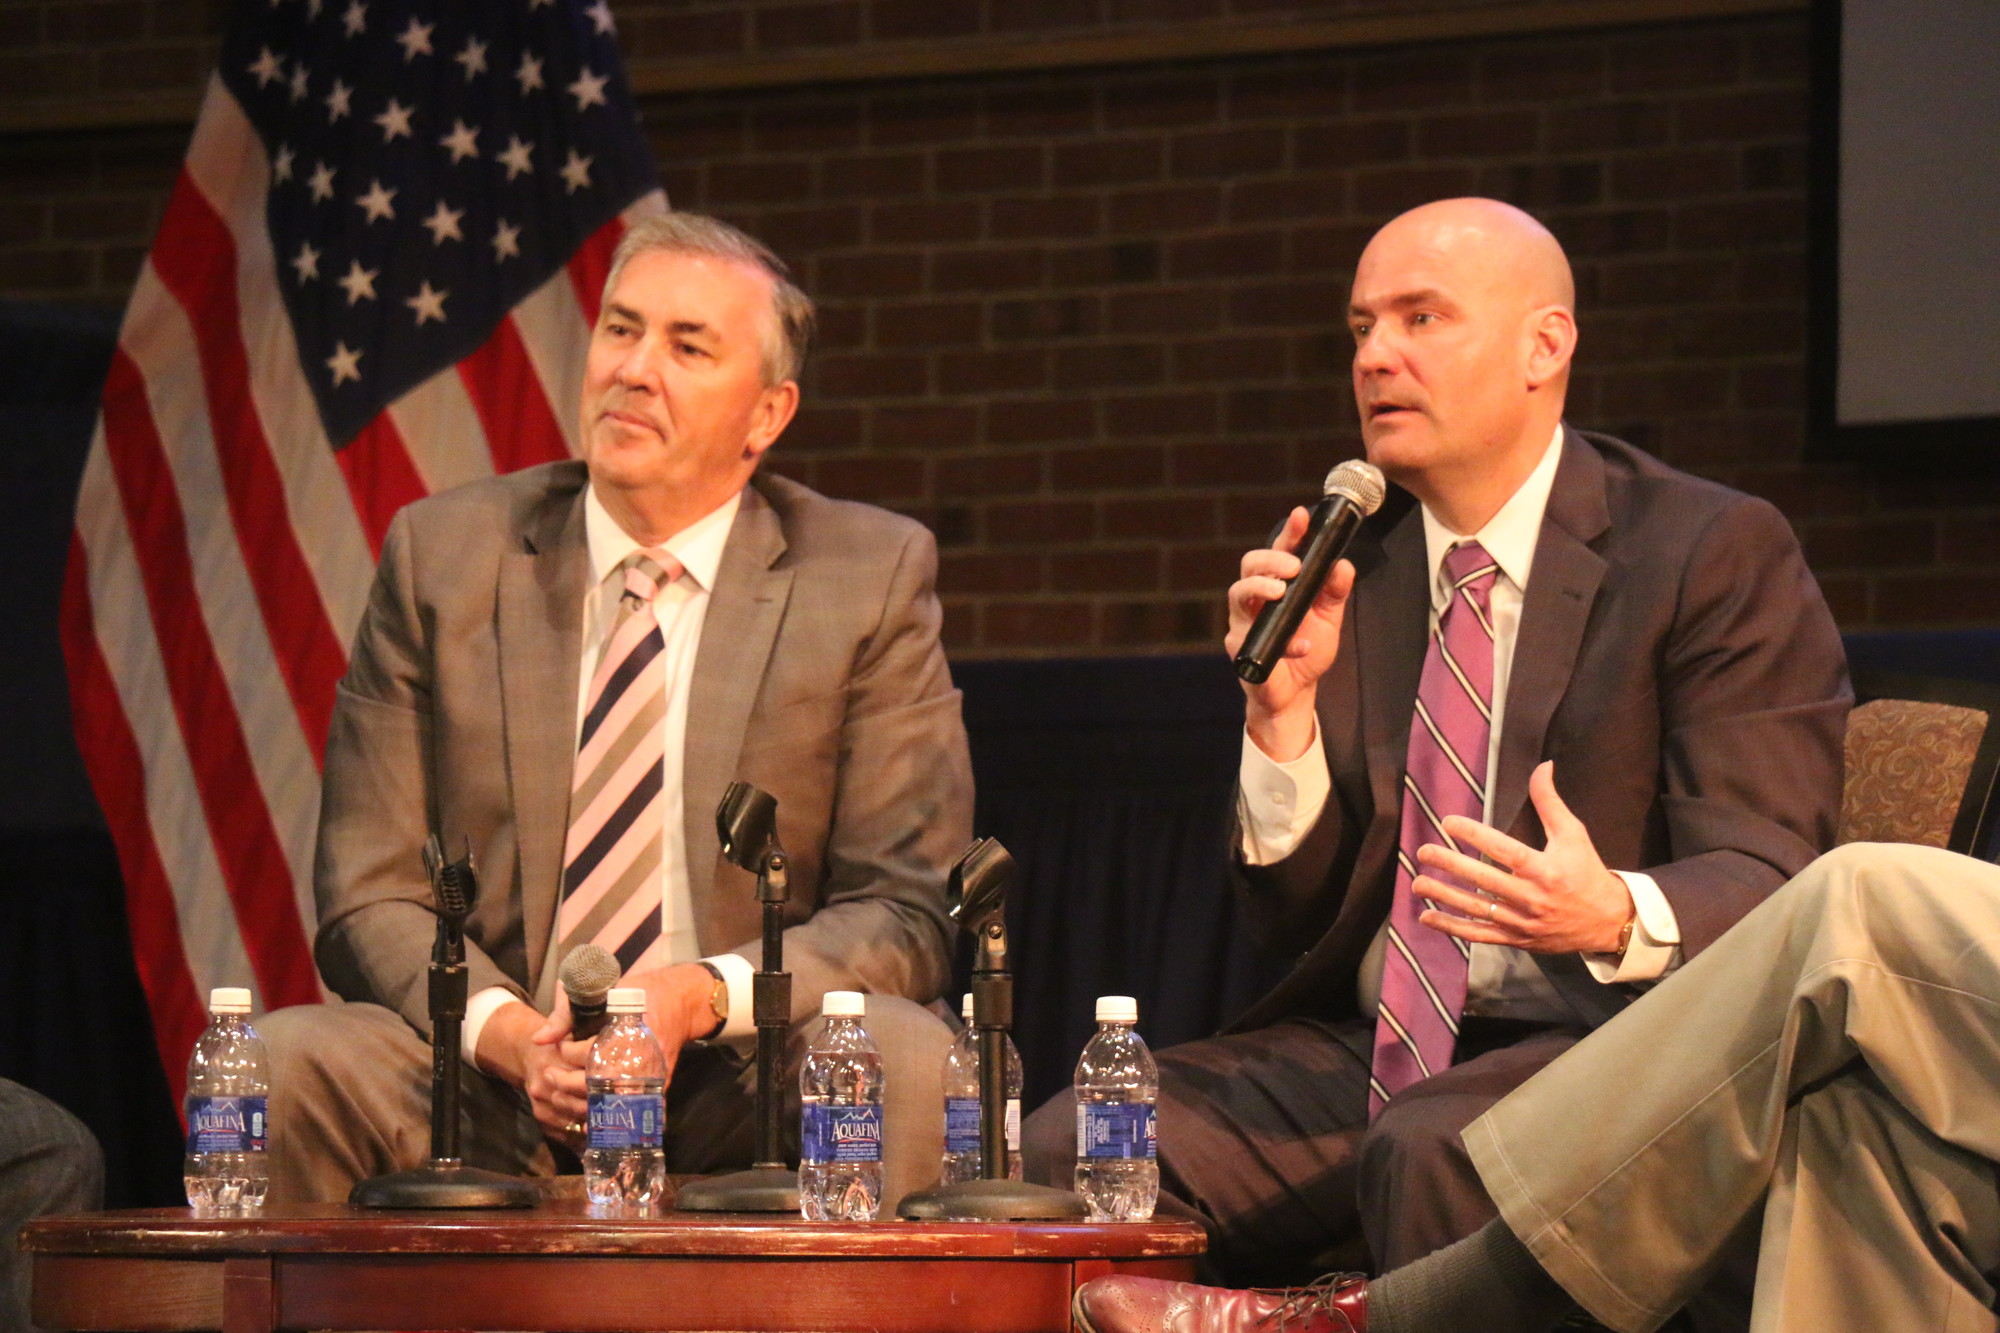 Former New York state Senator Michael Balboni, left, and political pundit Christopher Hahn spoke during the panel discussion.